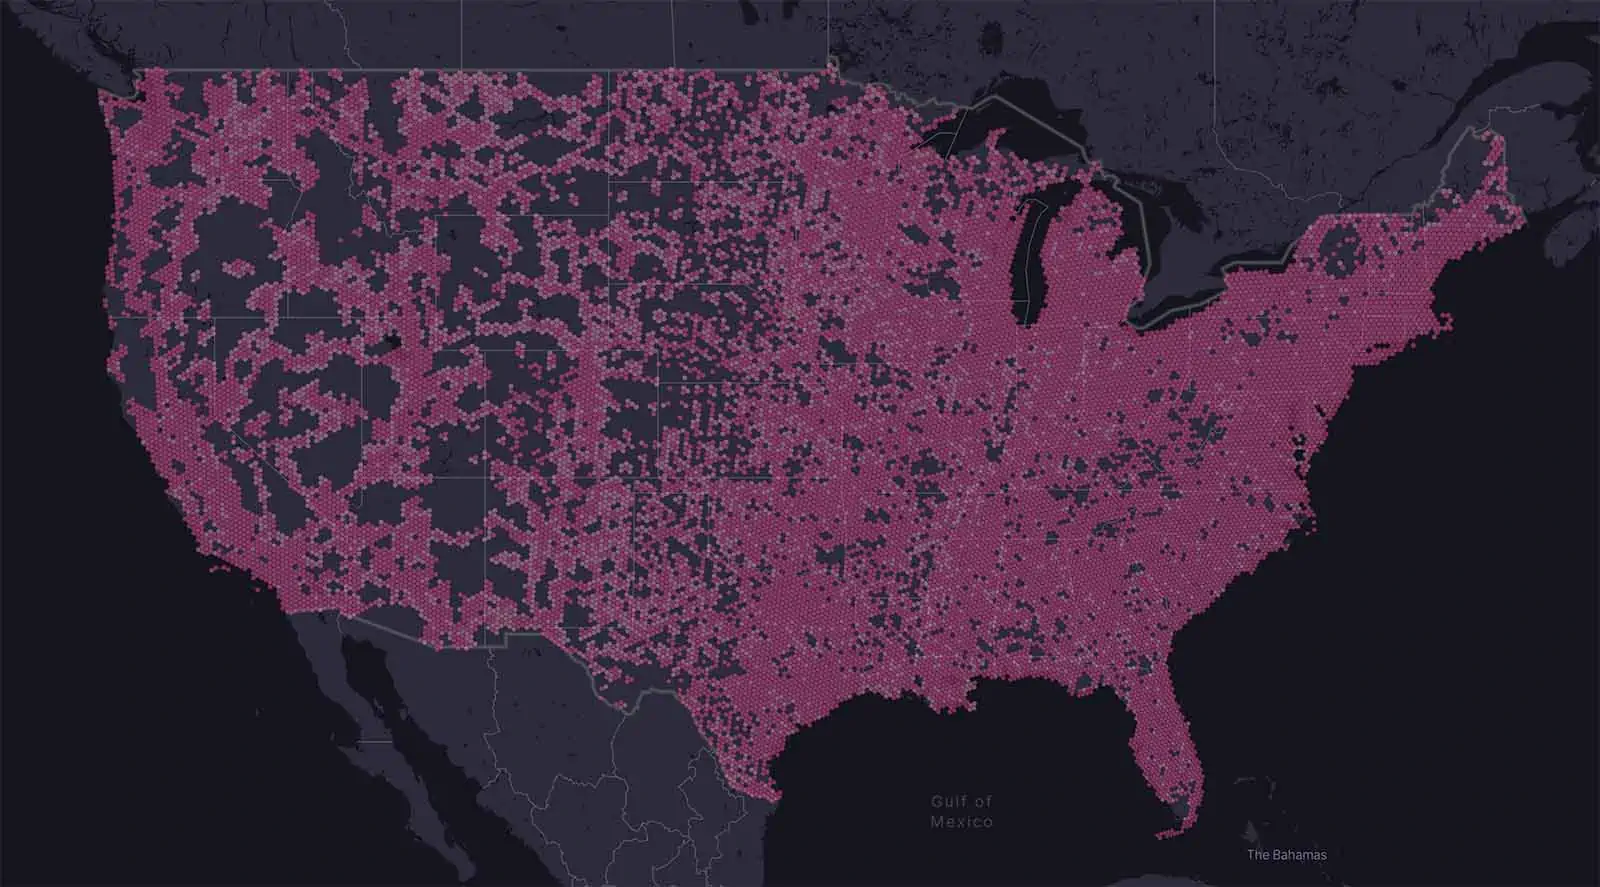 T-Mobile 5G coverage map